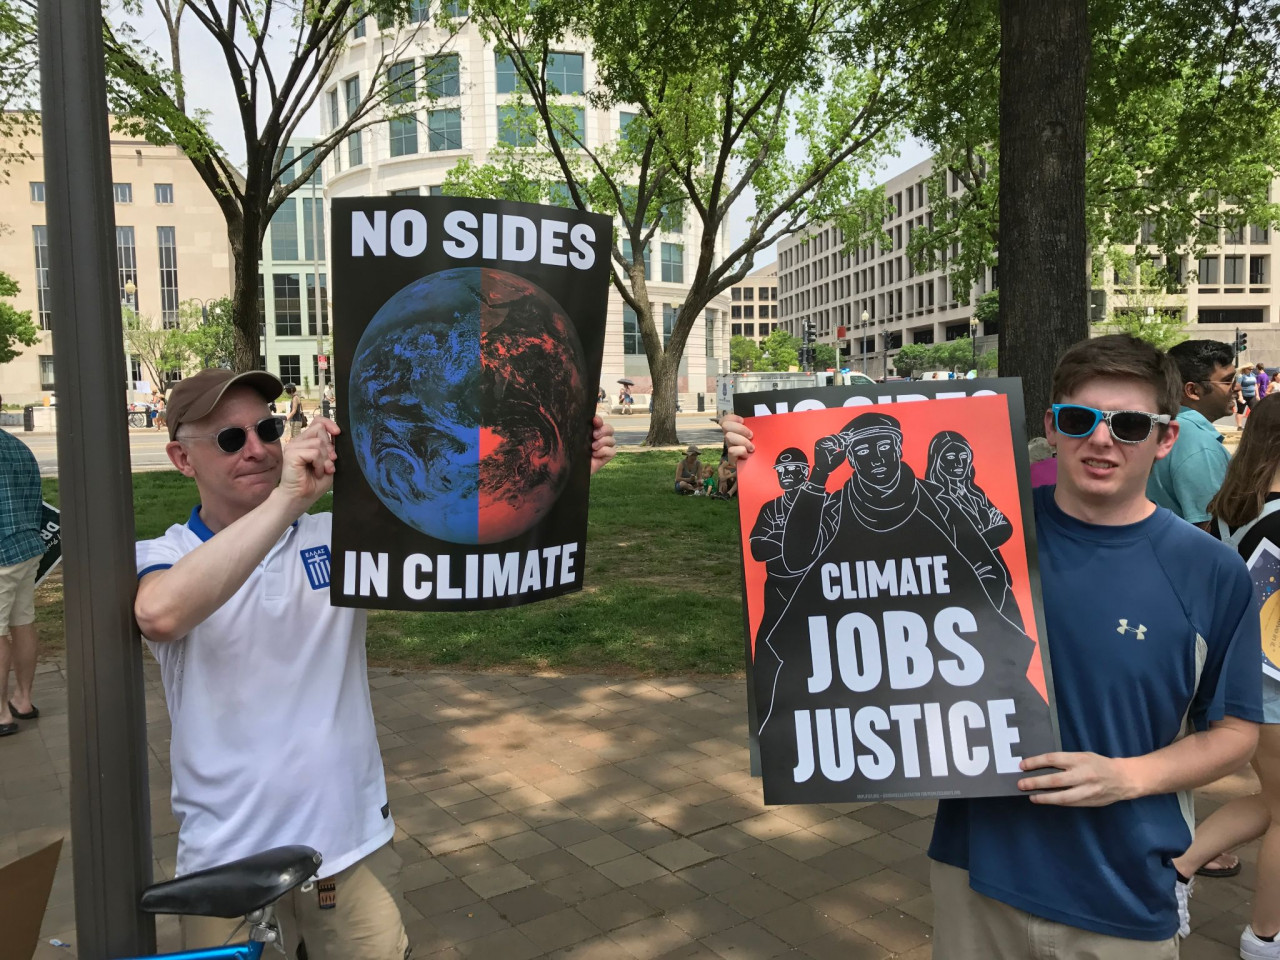 People's Climate March 2017 - No Sides in Climate